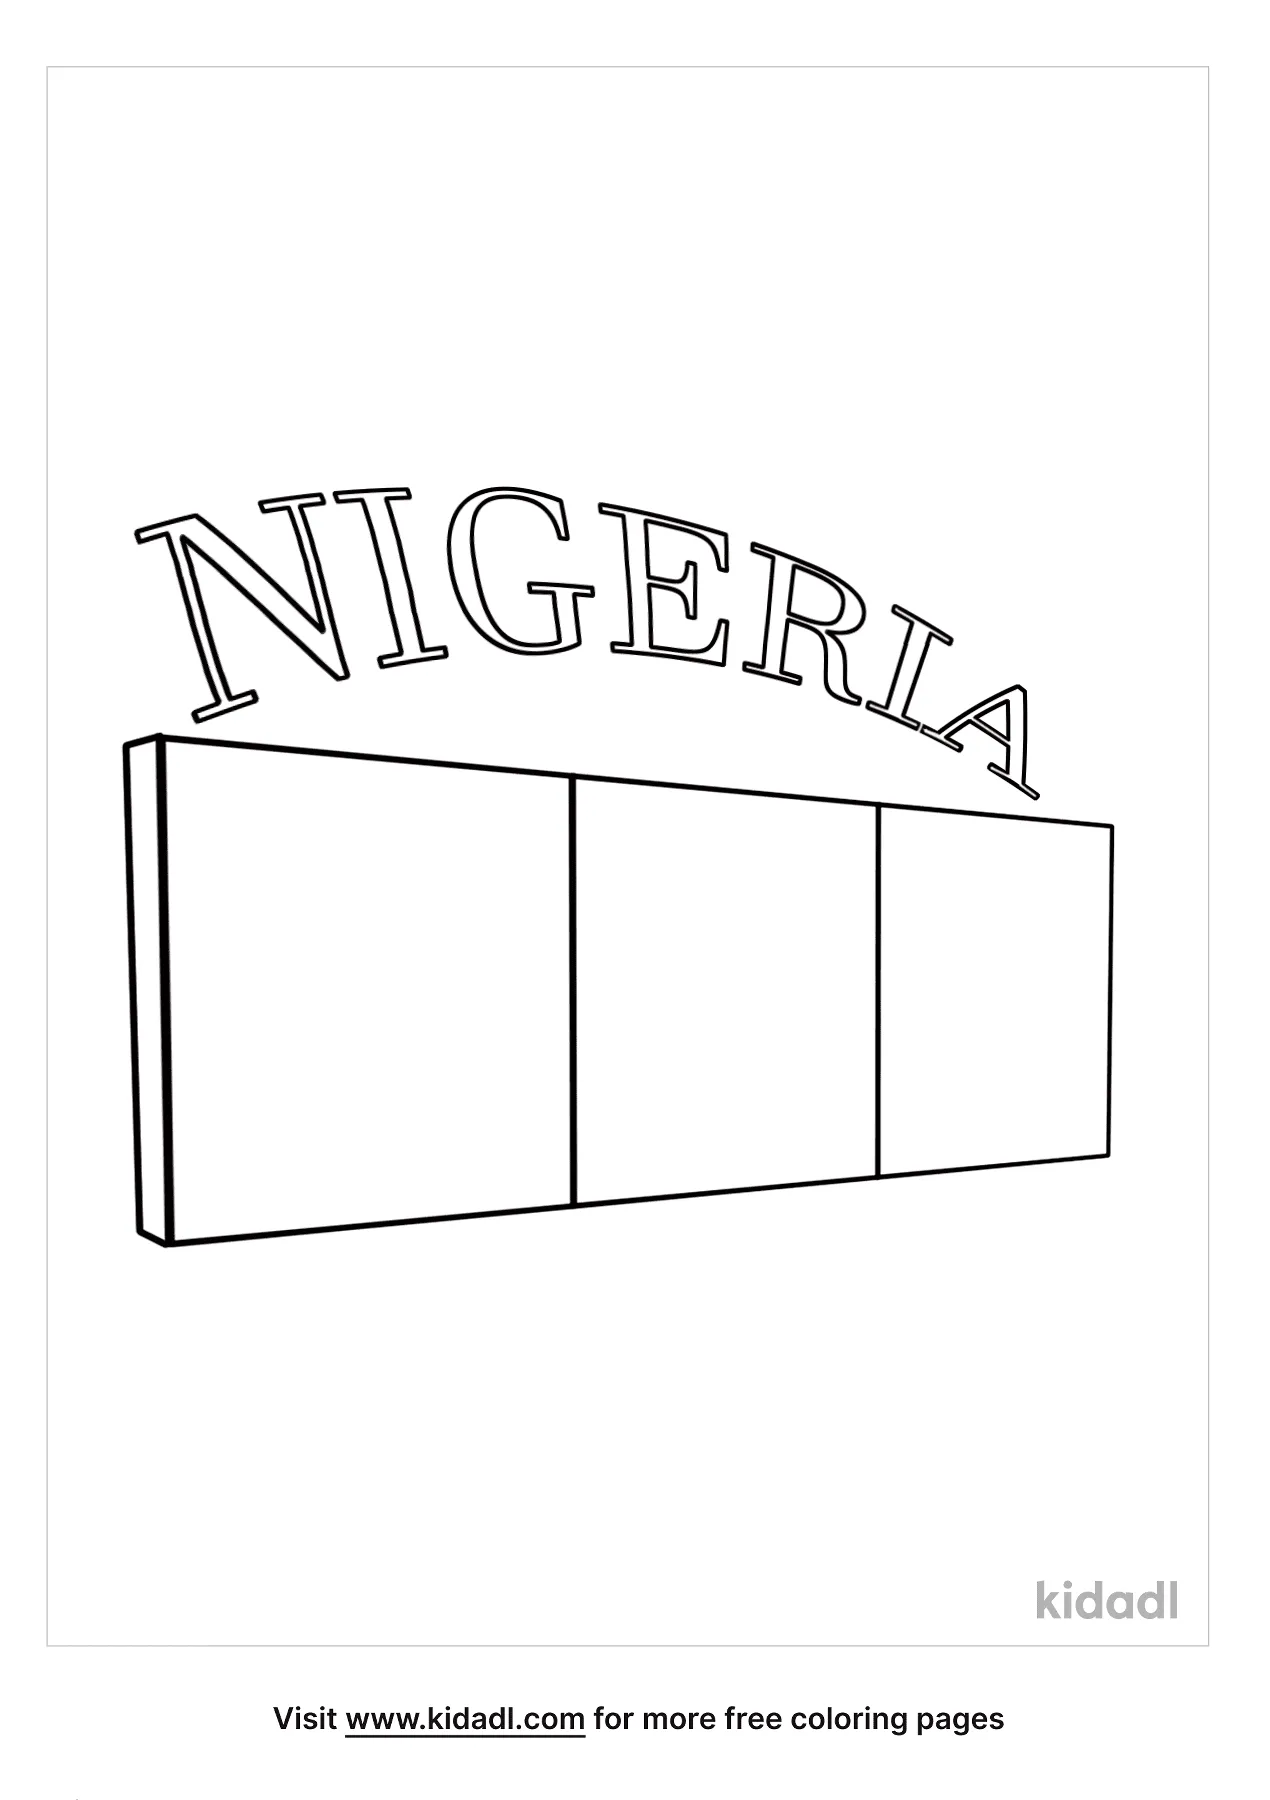 Free nigeria flag coloring page coloring page printables